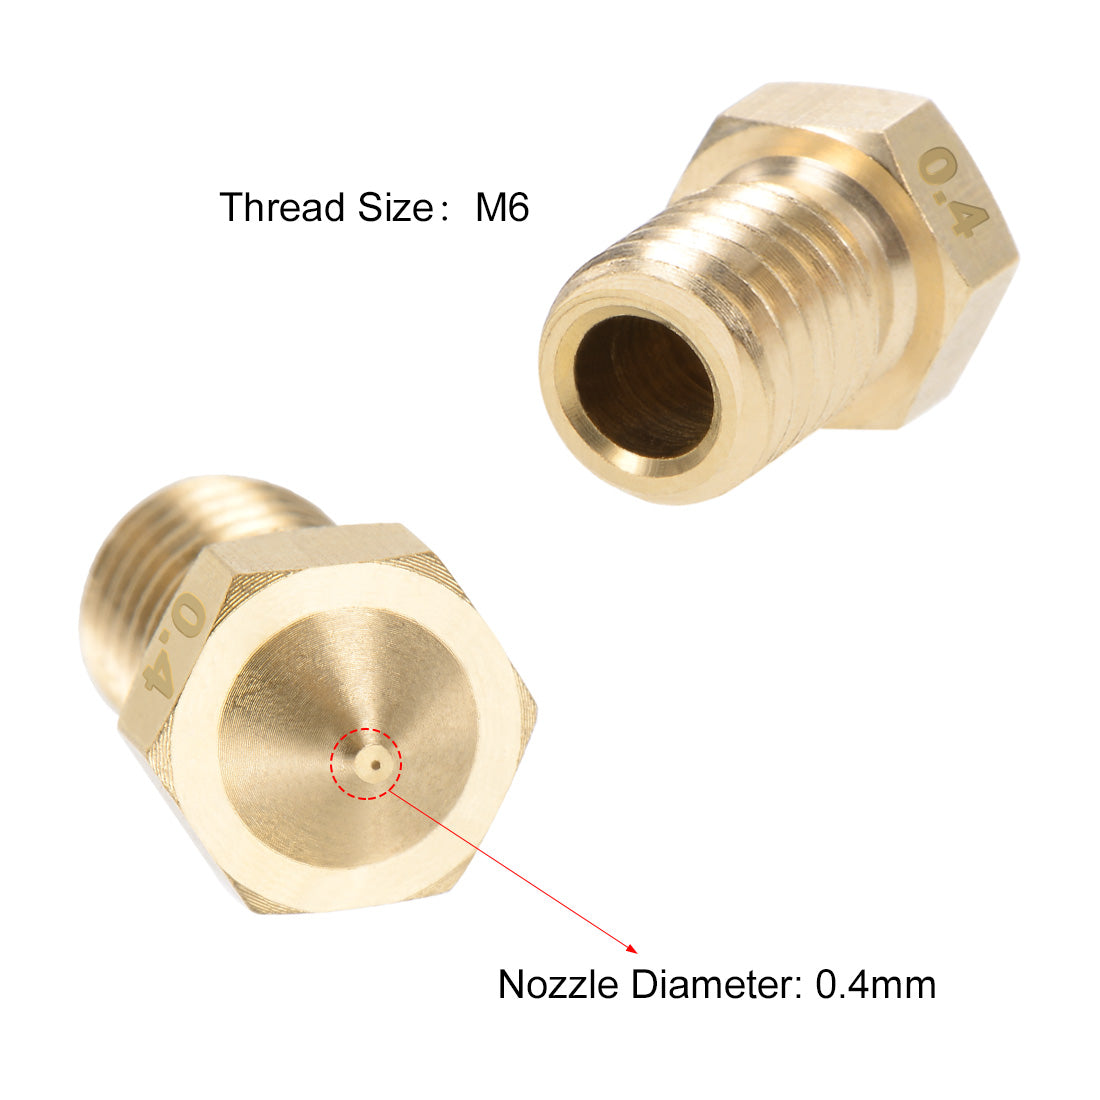 uxcell Uxcell 0.4mm 3D Printer Nozzle Head M6 Thread Replacement for V5 V6 3mm Extruder Print, Brass 2pcs